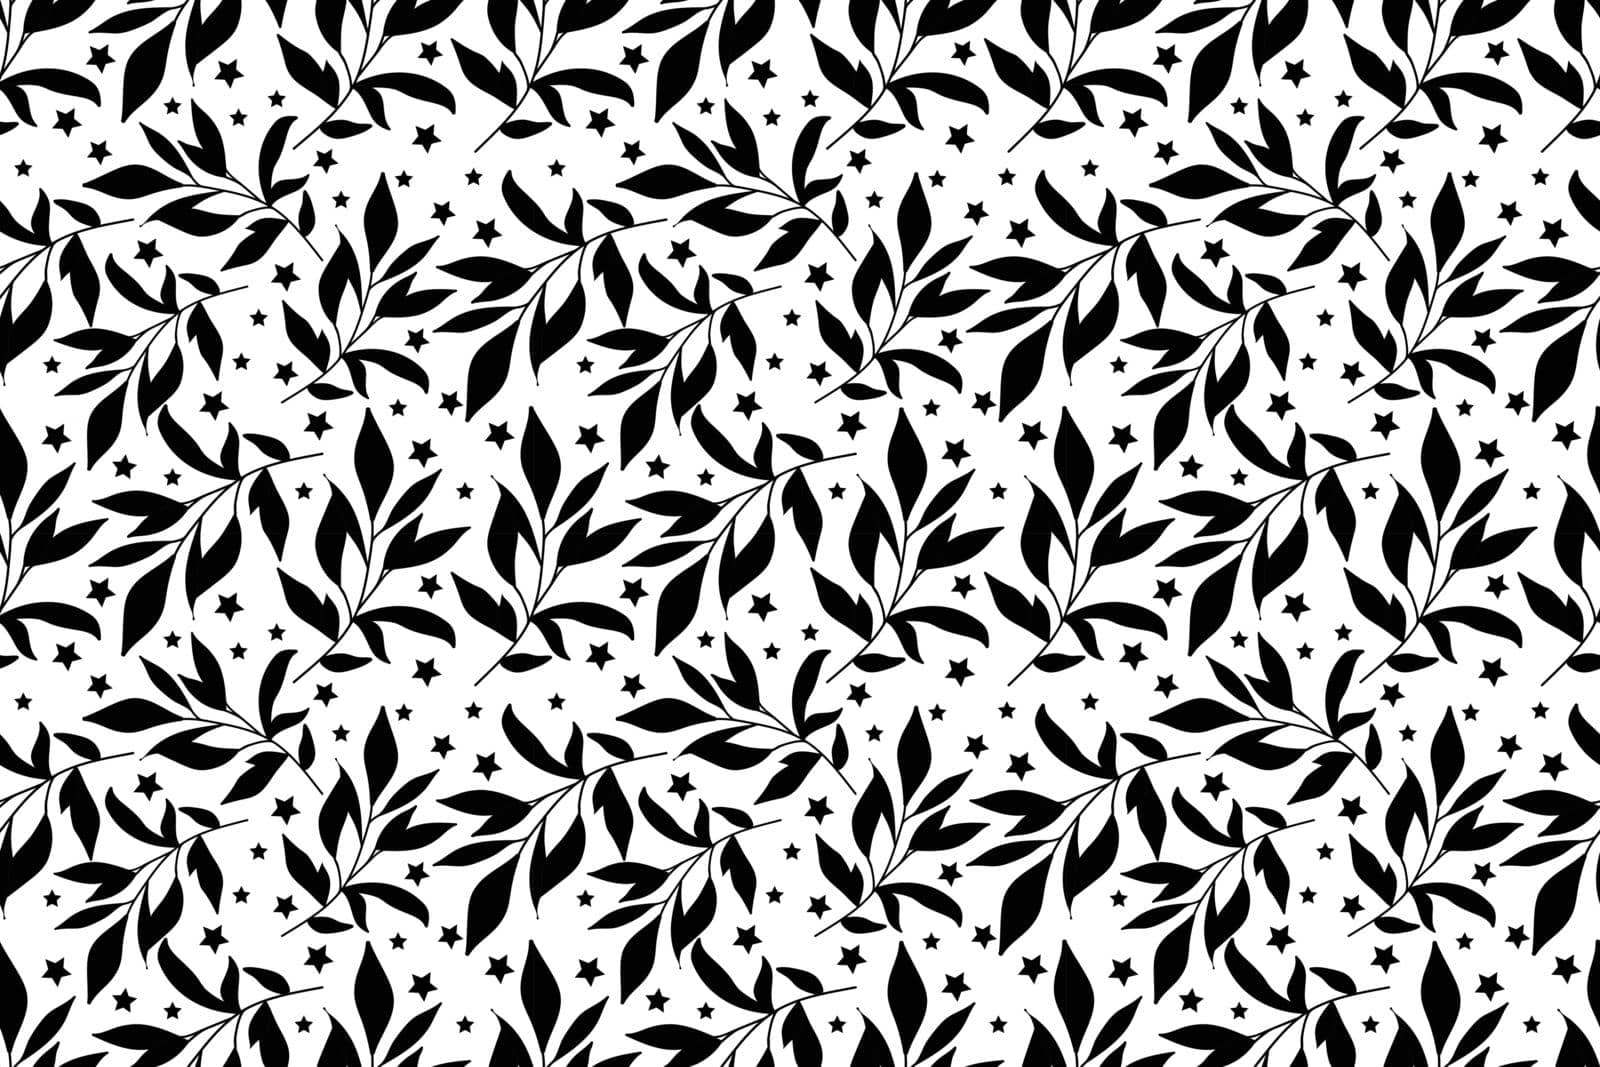 Abstract seamless pattern with leaves on white background. Repeating endless black leaves in abstract style. Modern texture print for fabric, wrapping, textile etc. Vector illustration.